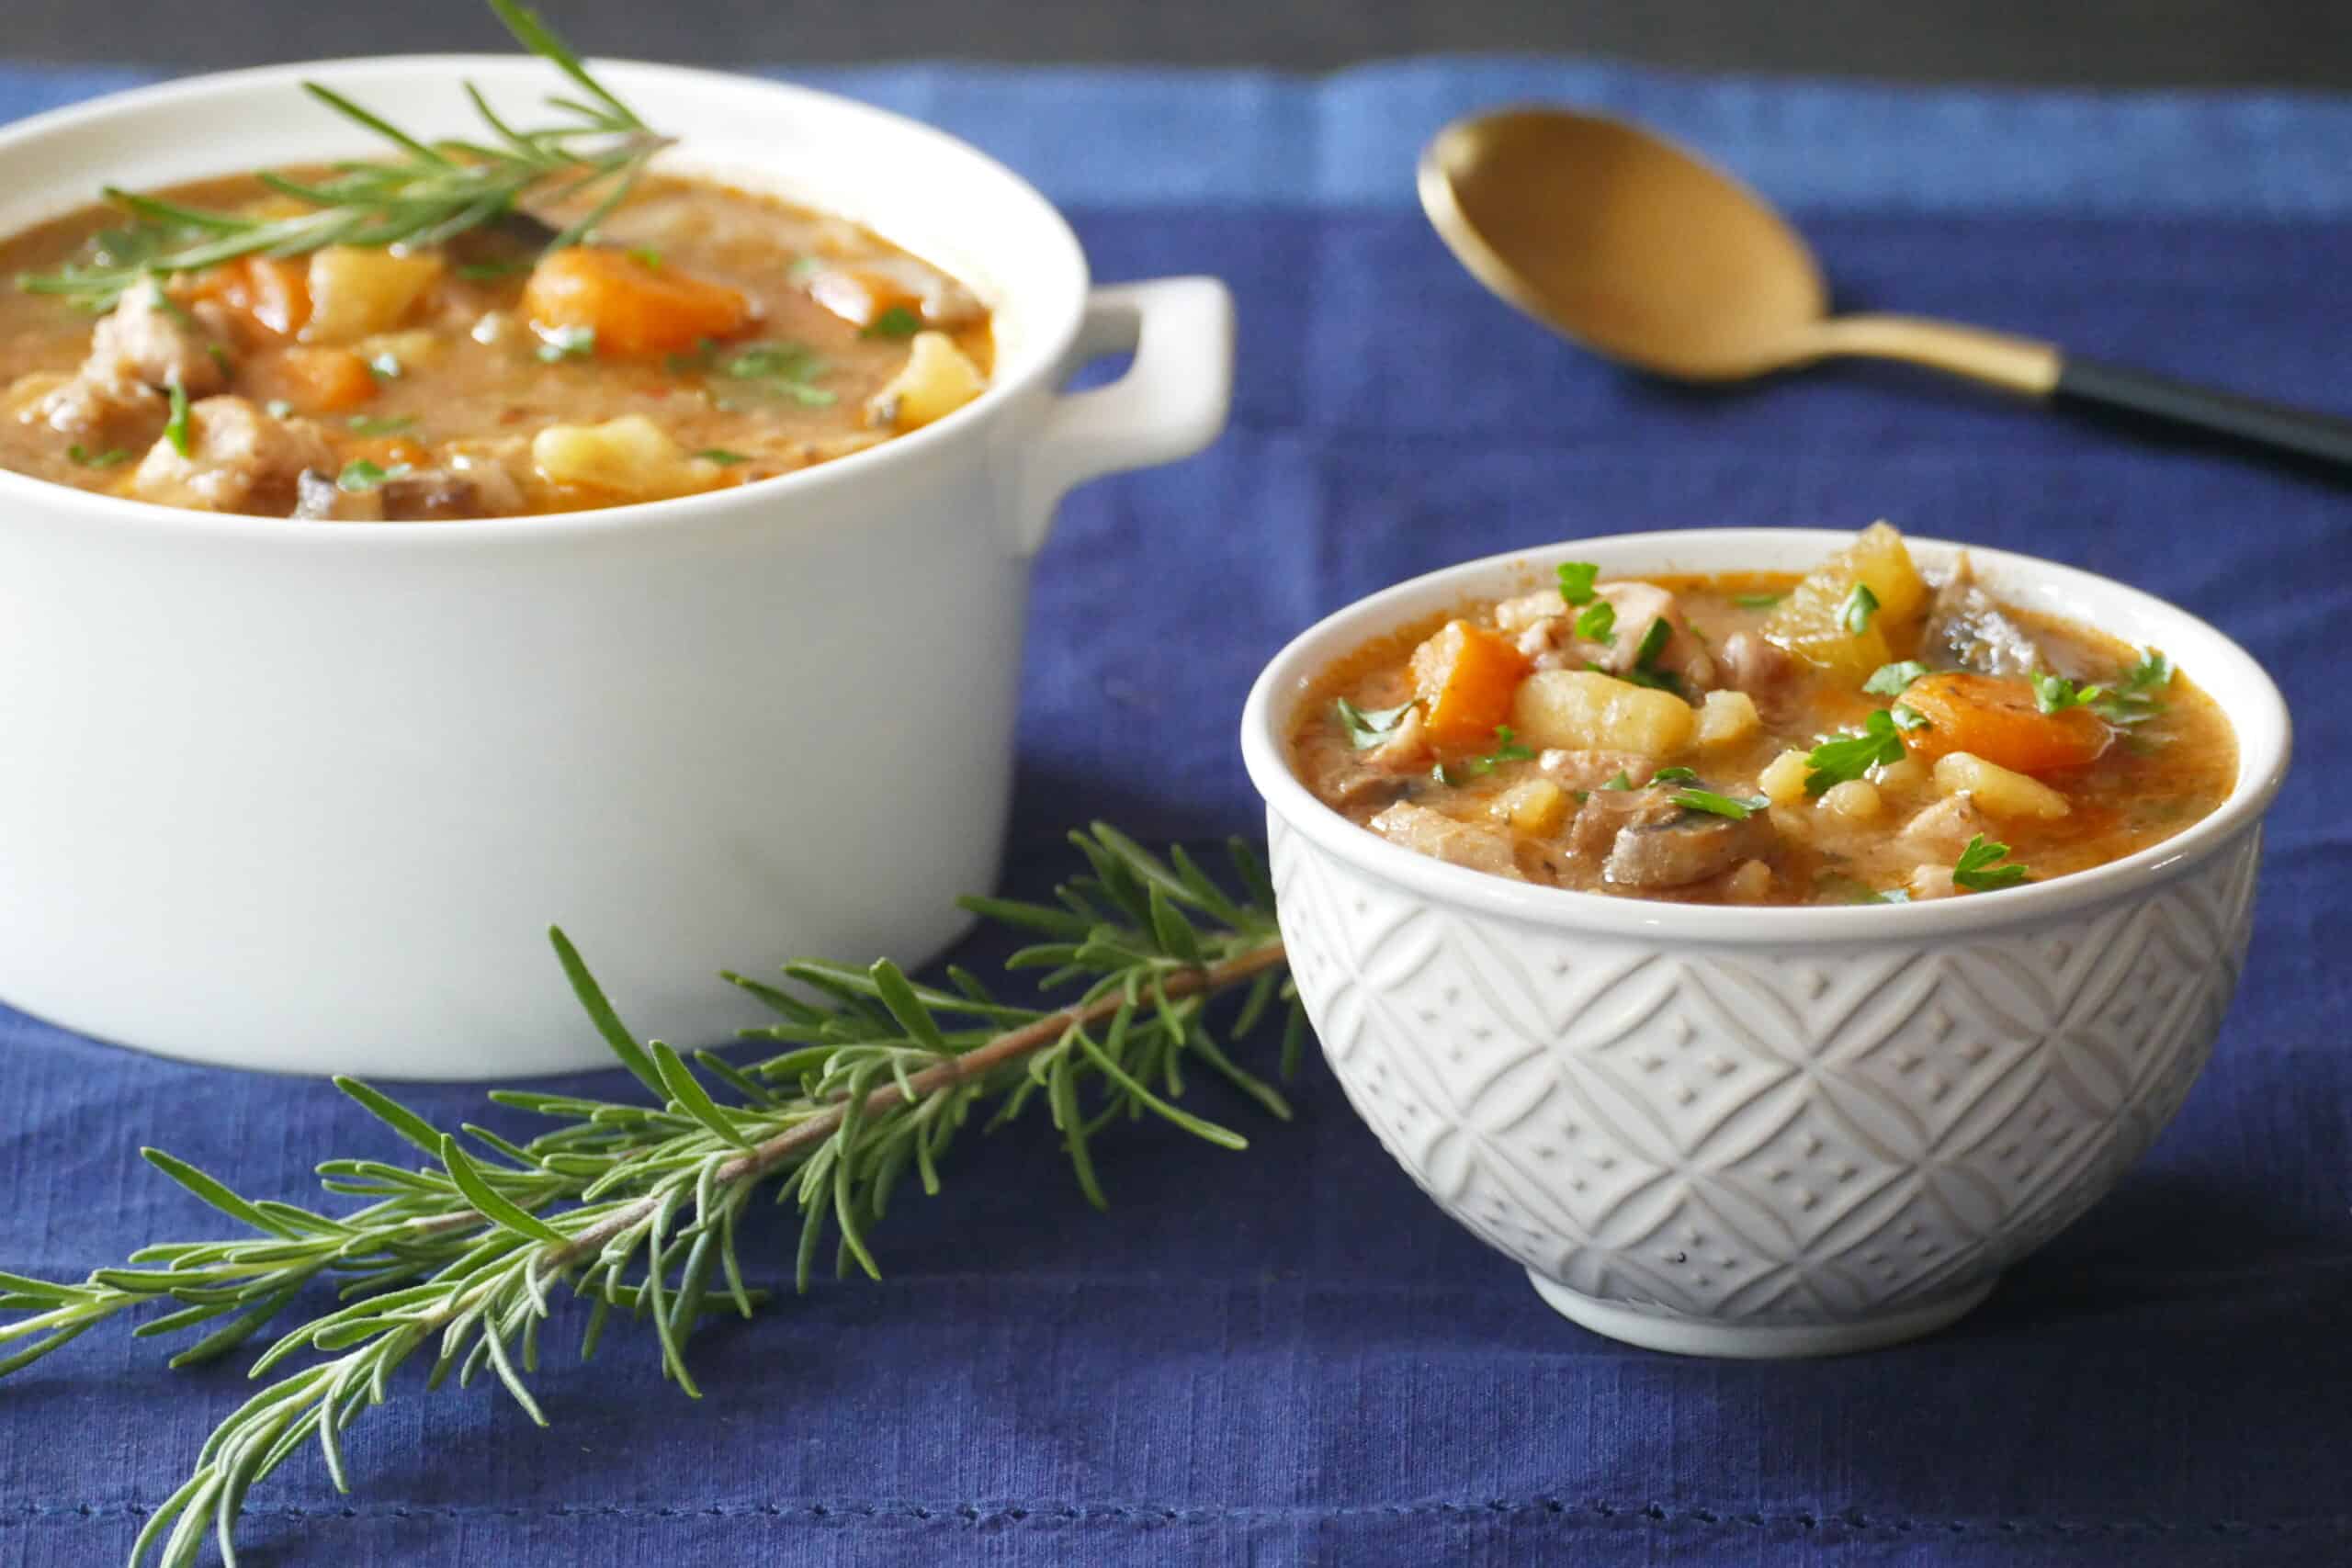 Serving bowl and small bowl with chicken stew with potatoes, carrots, parsley and spring of rosemary.